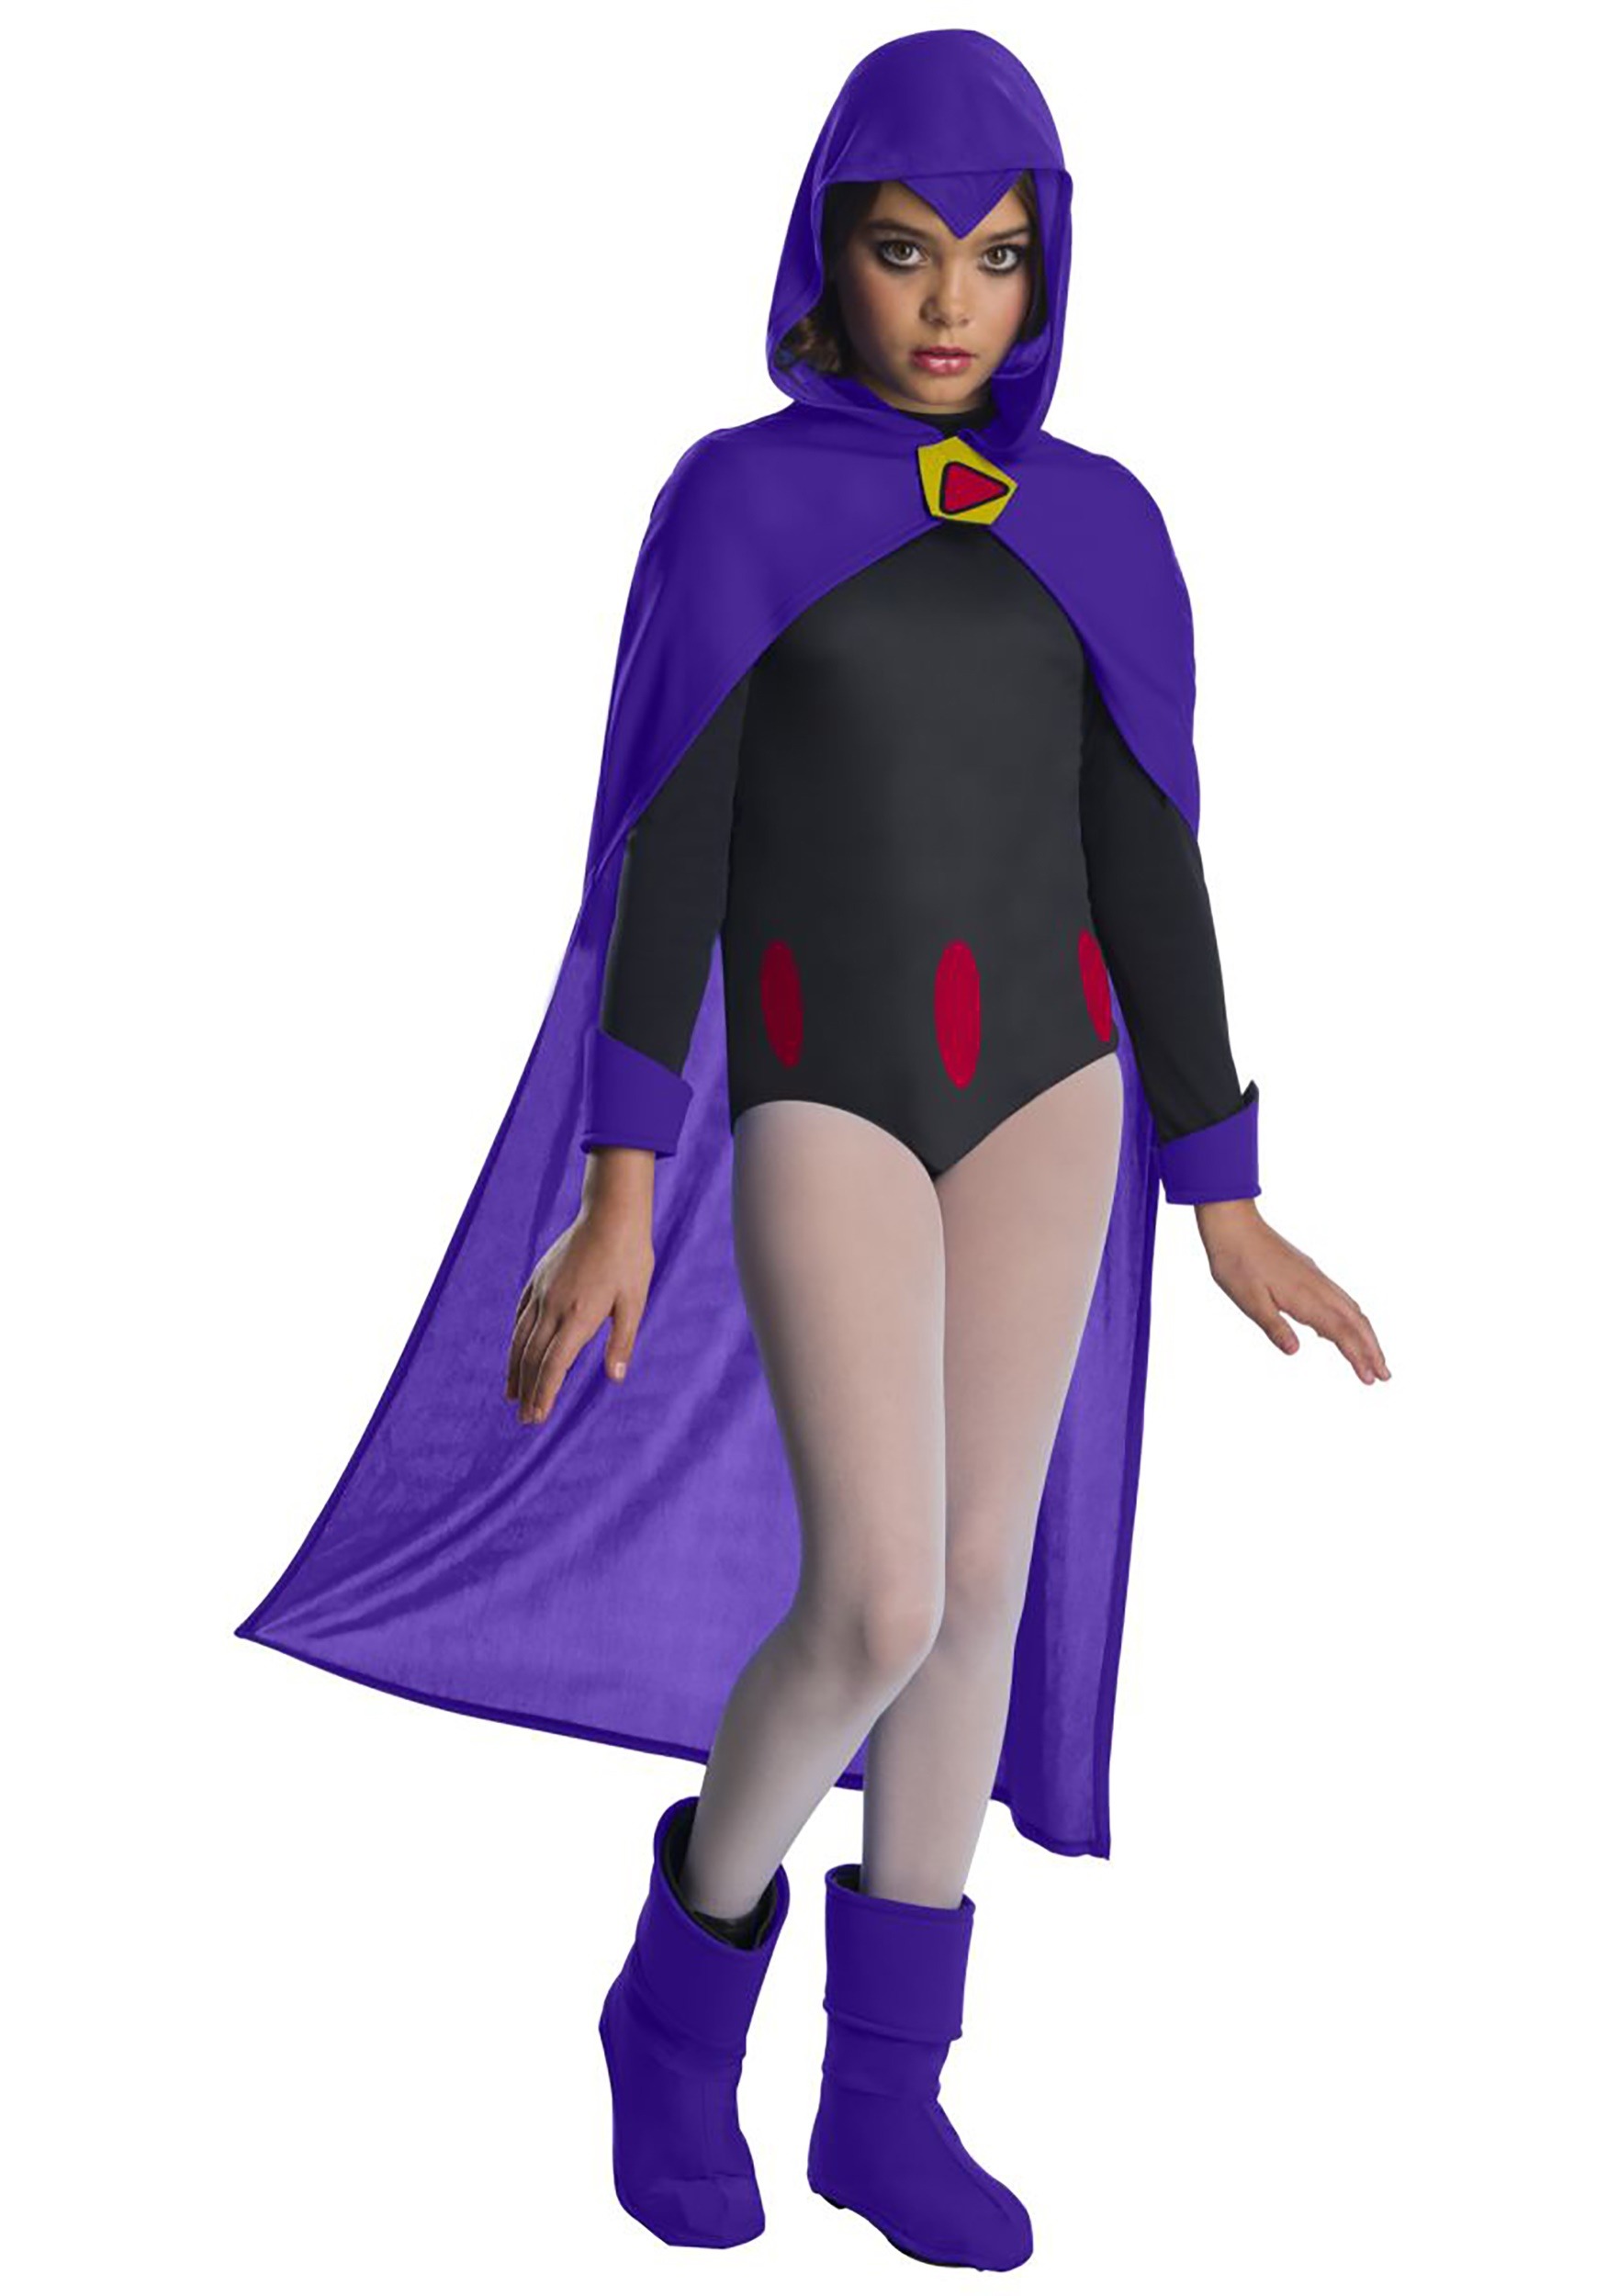 cinda adams add images of raven from teen titans photo